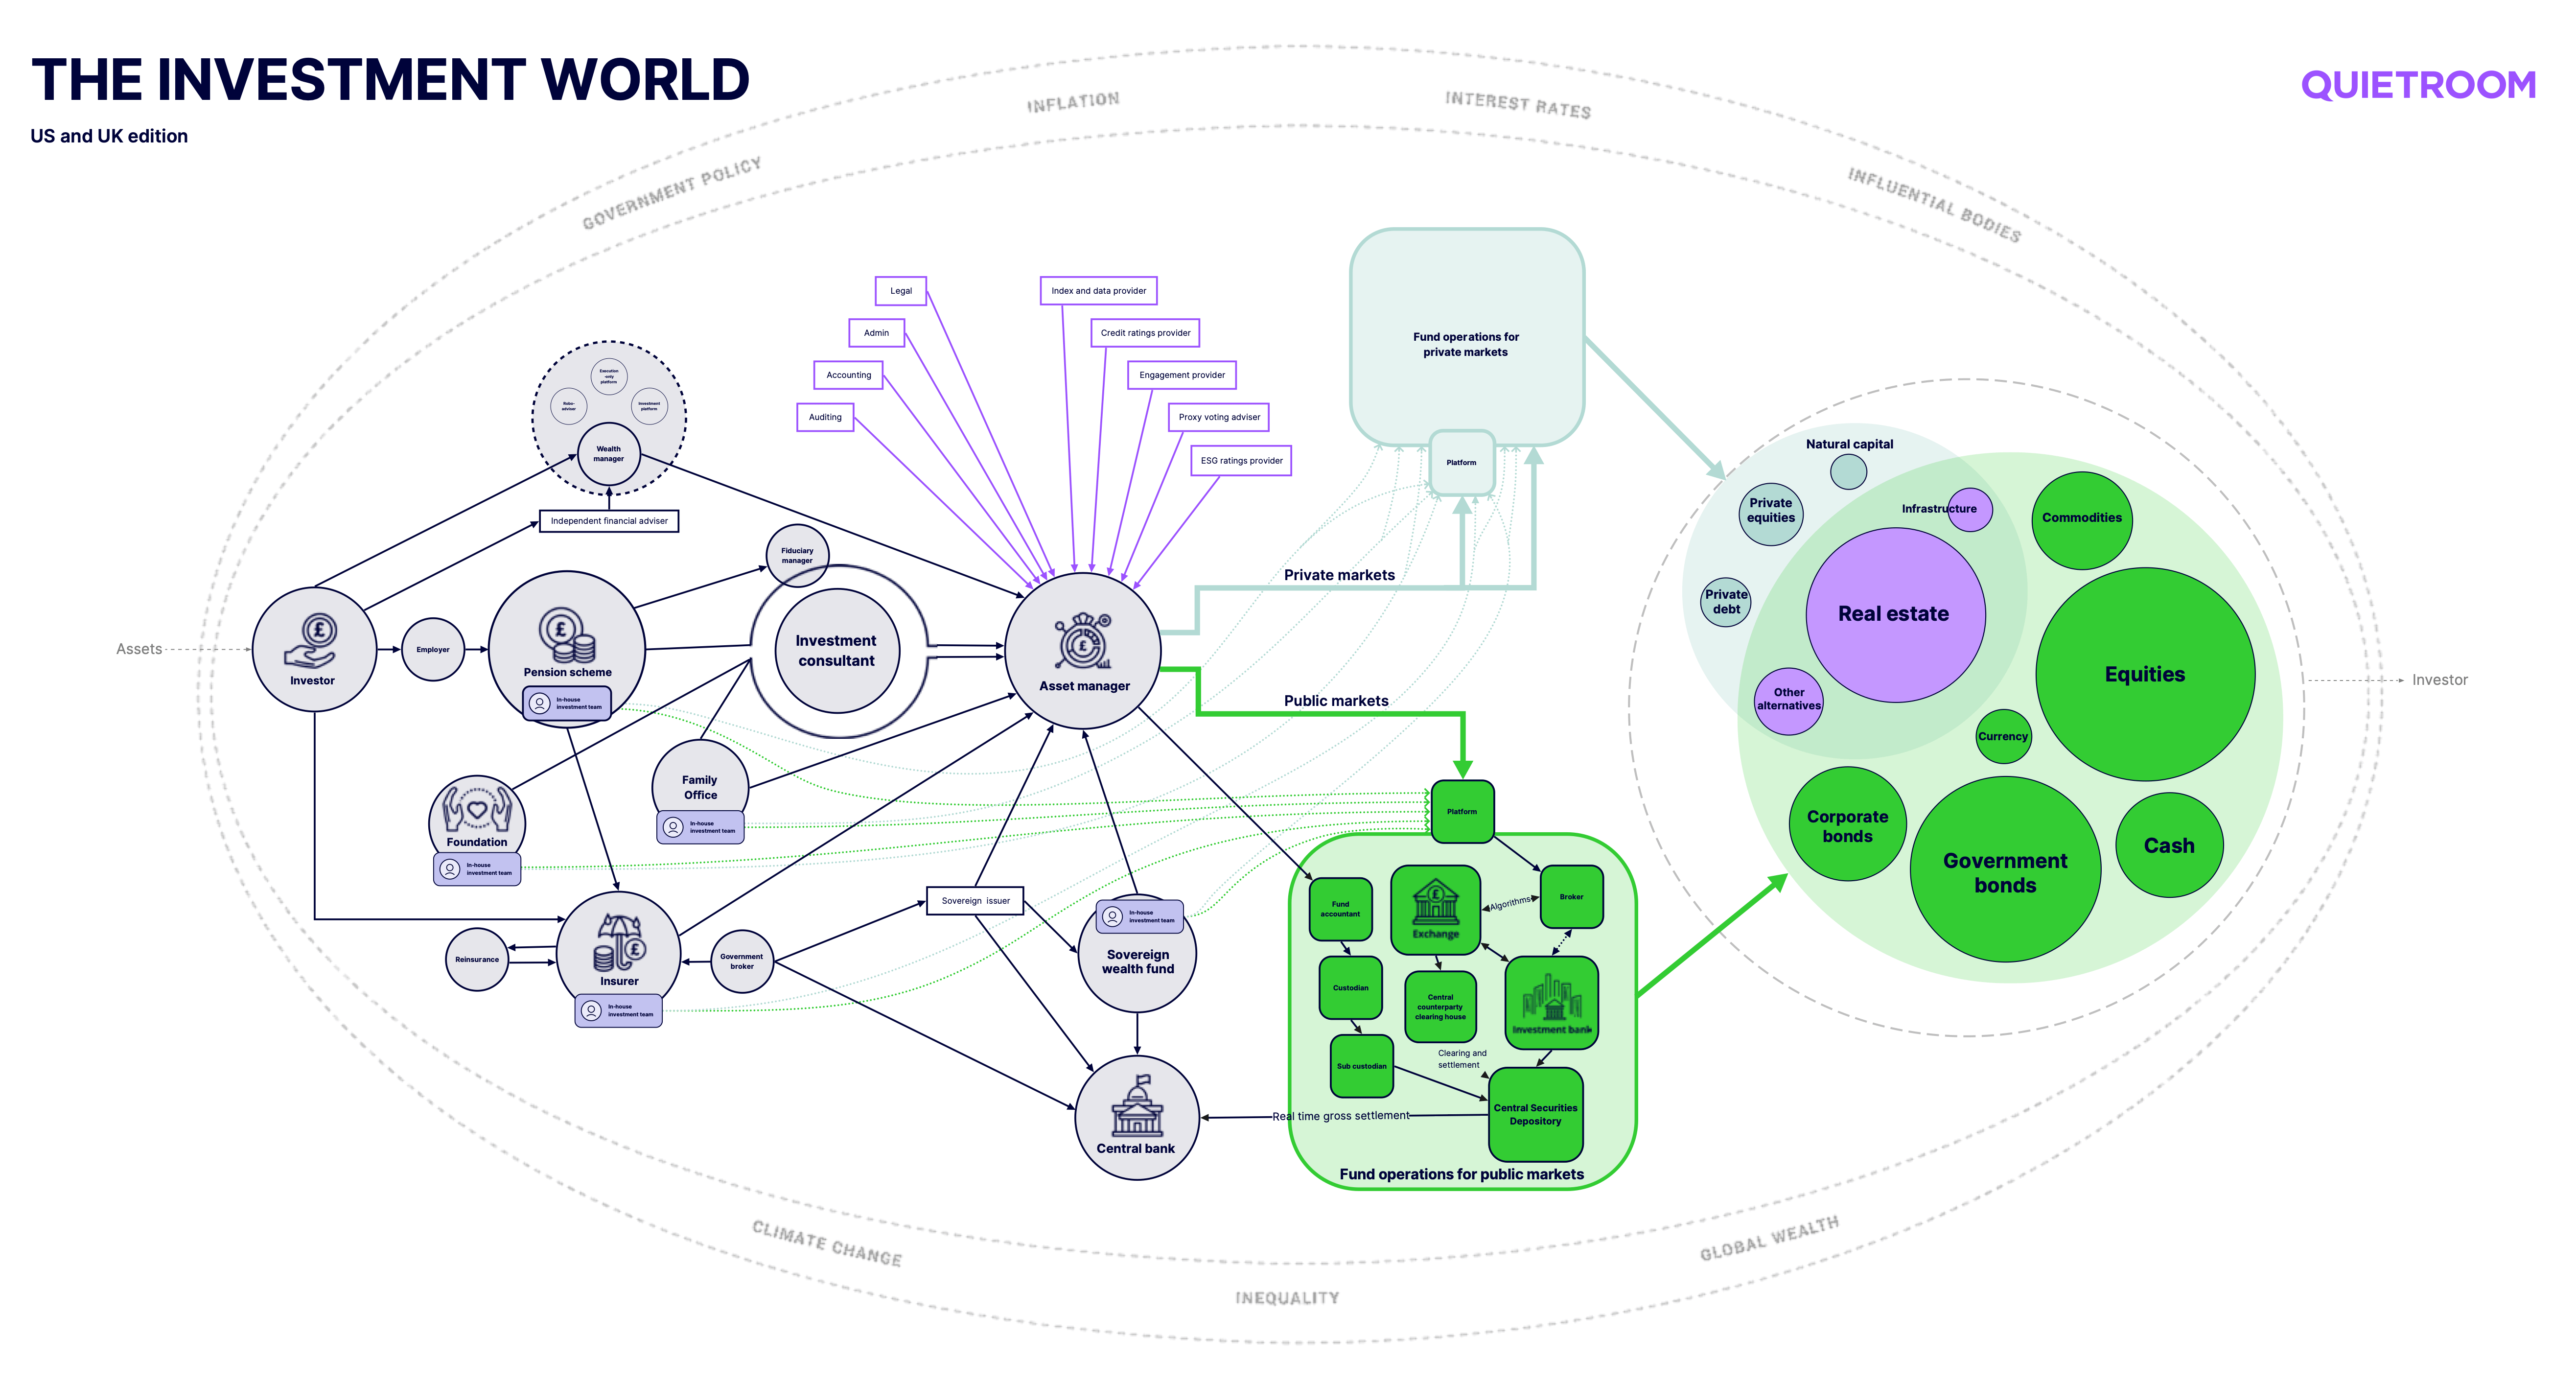 Map of the investment world by Quietroom